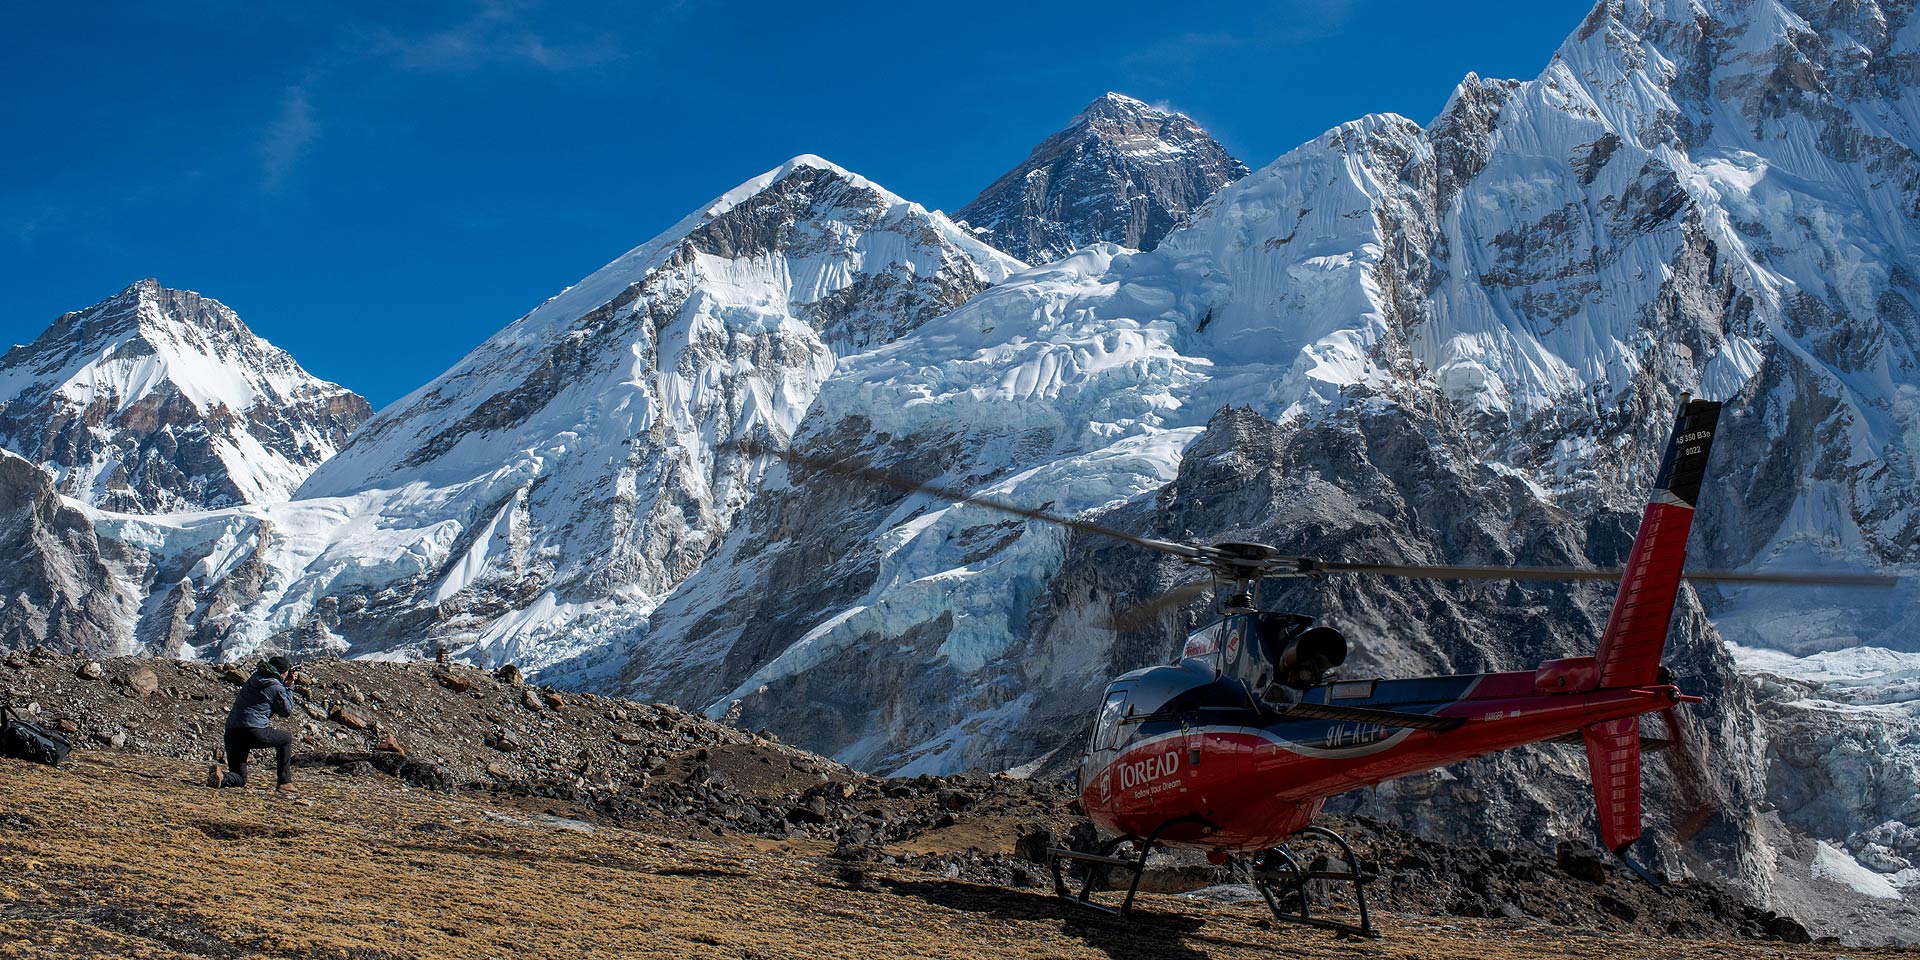 Helicopter on Kalapattar in front of Everest, photographer getting his shot on a heli sightseeing trip in Nepal